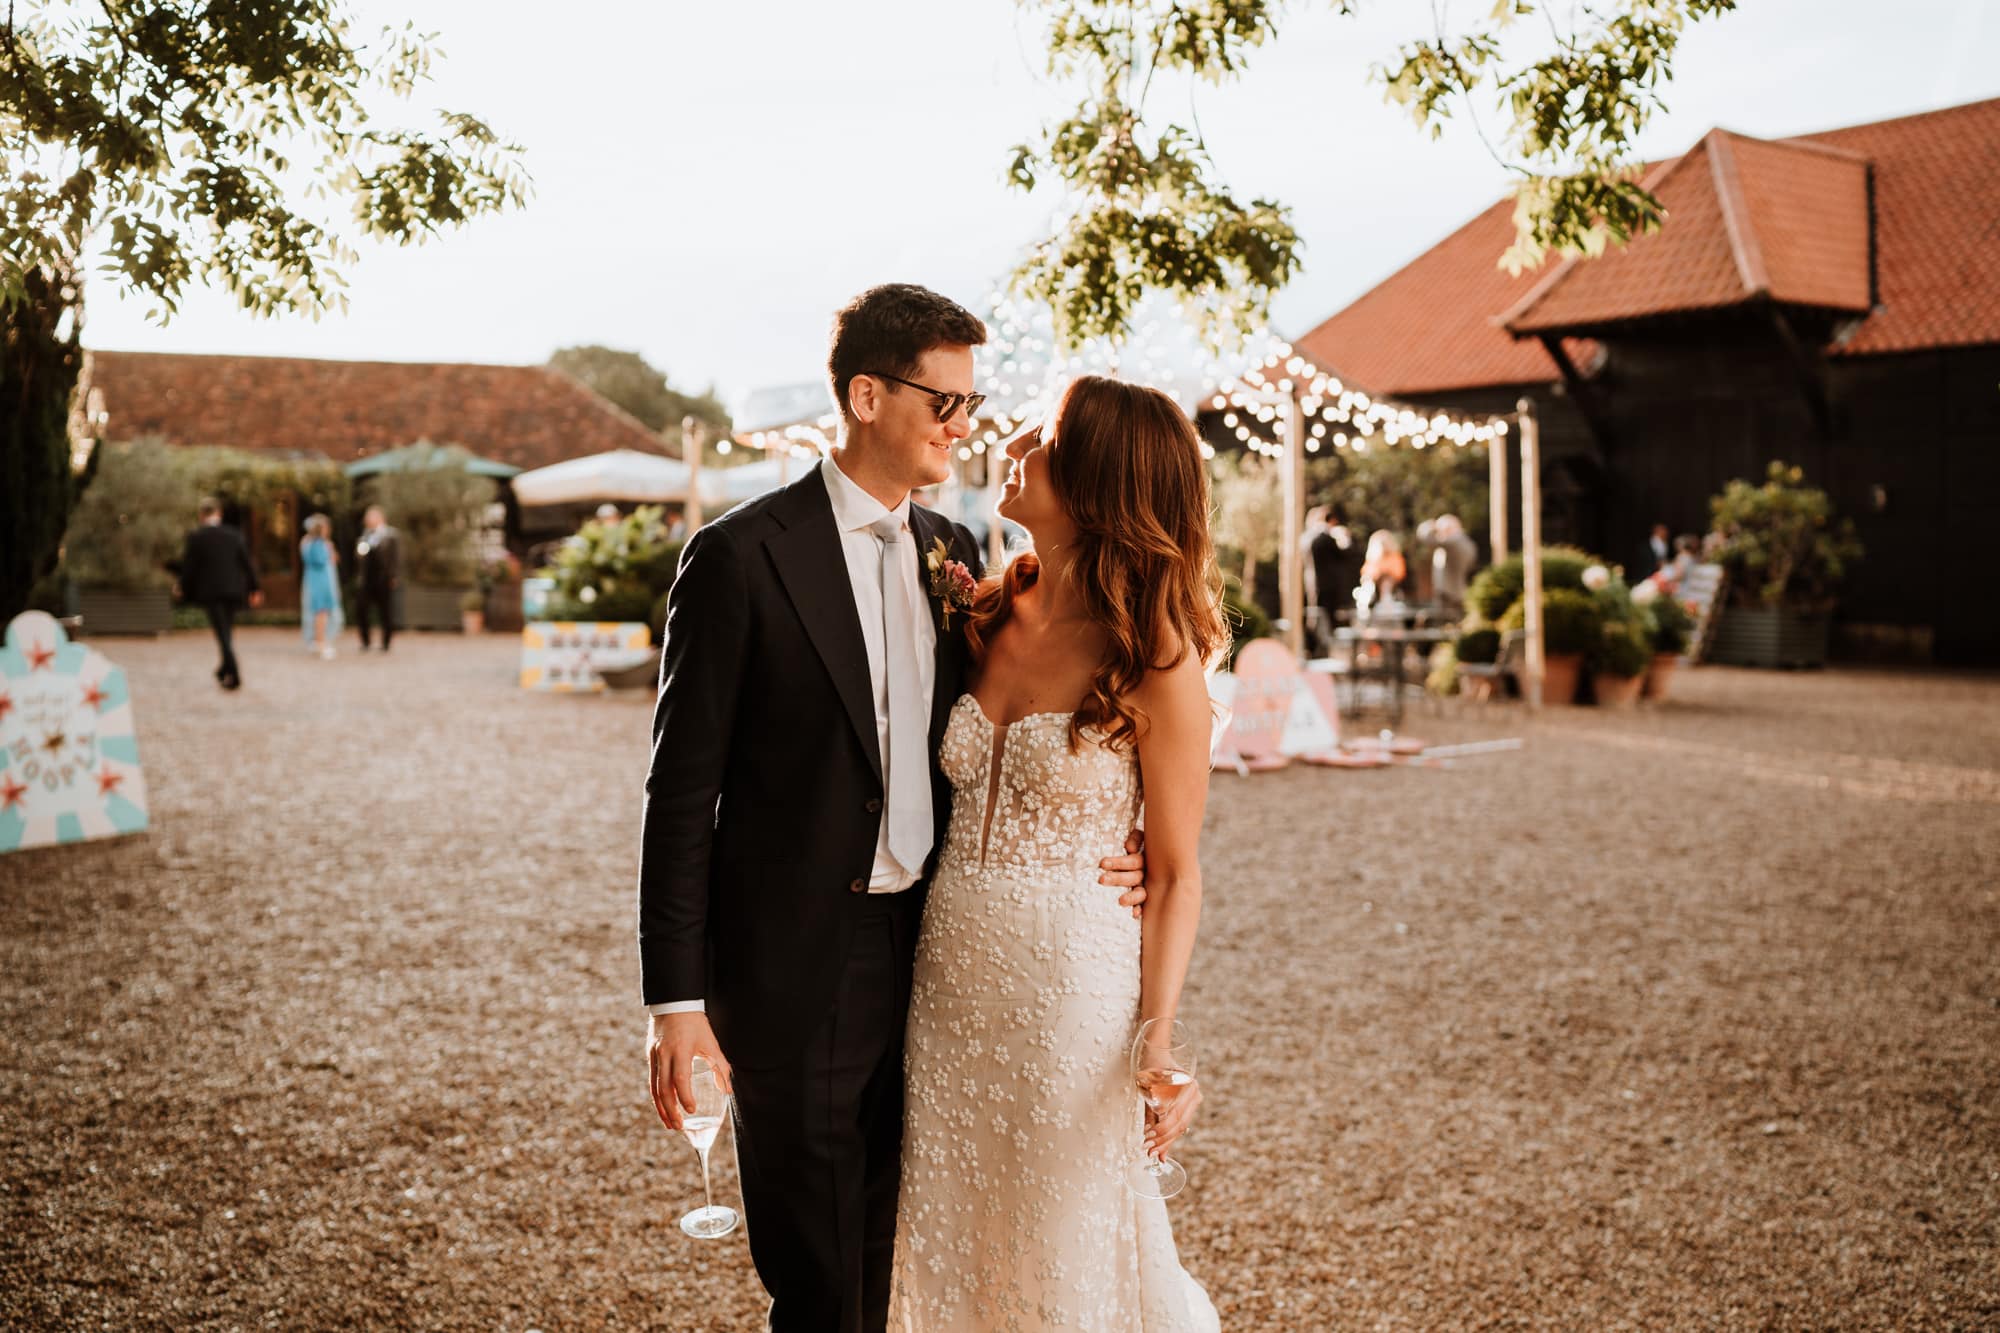 Relaxed Bride and Groom with glass in hand and sunglasses on smiling at each other with a carousel in the background